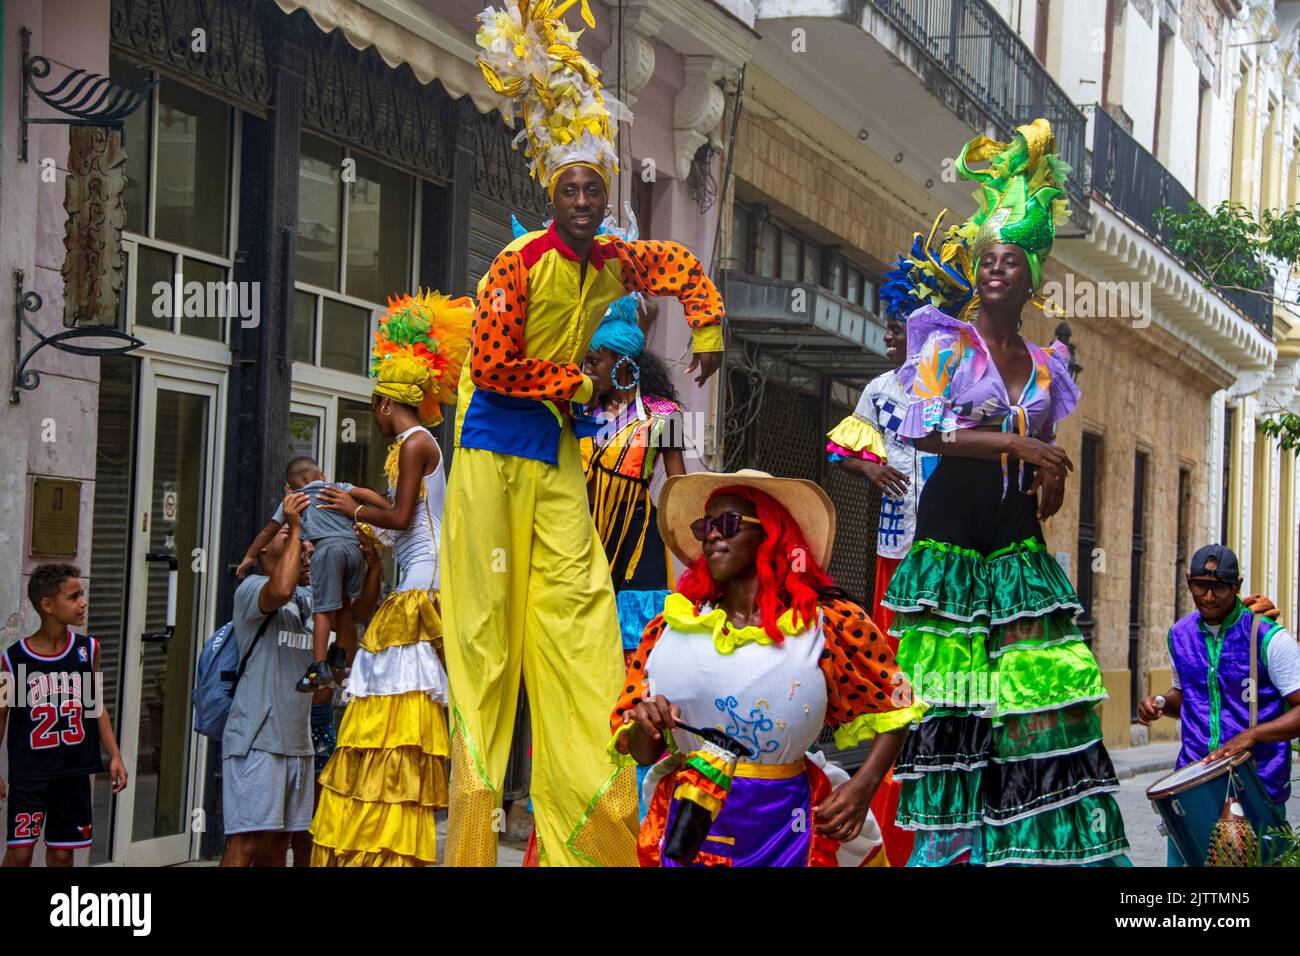 A group of Cuban entertainers and musicians stilt walk their way around downtown, Havana, Cuba, performing for both locals and tourists. Stock Photo